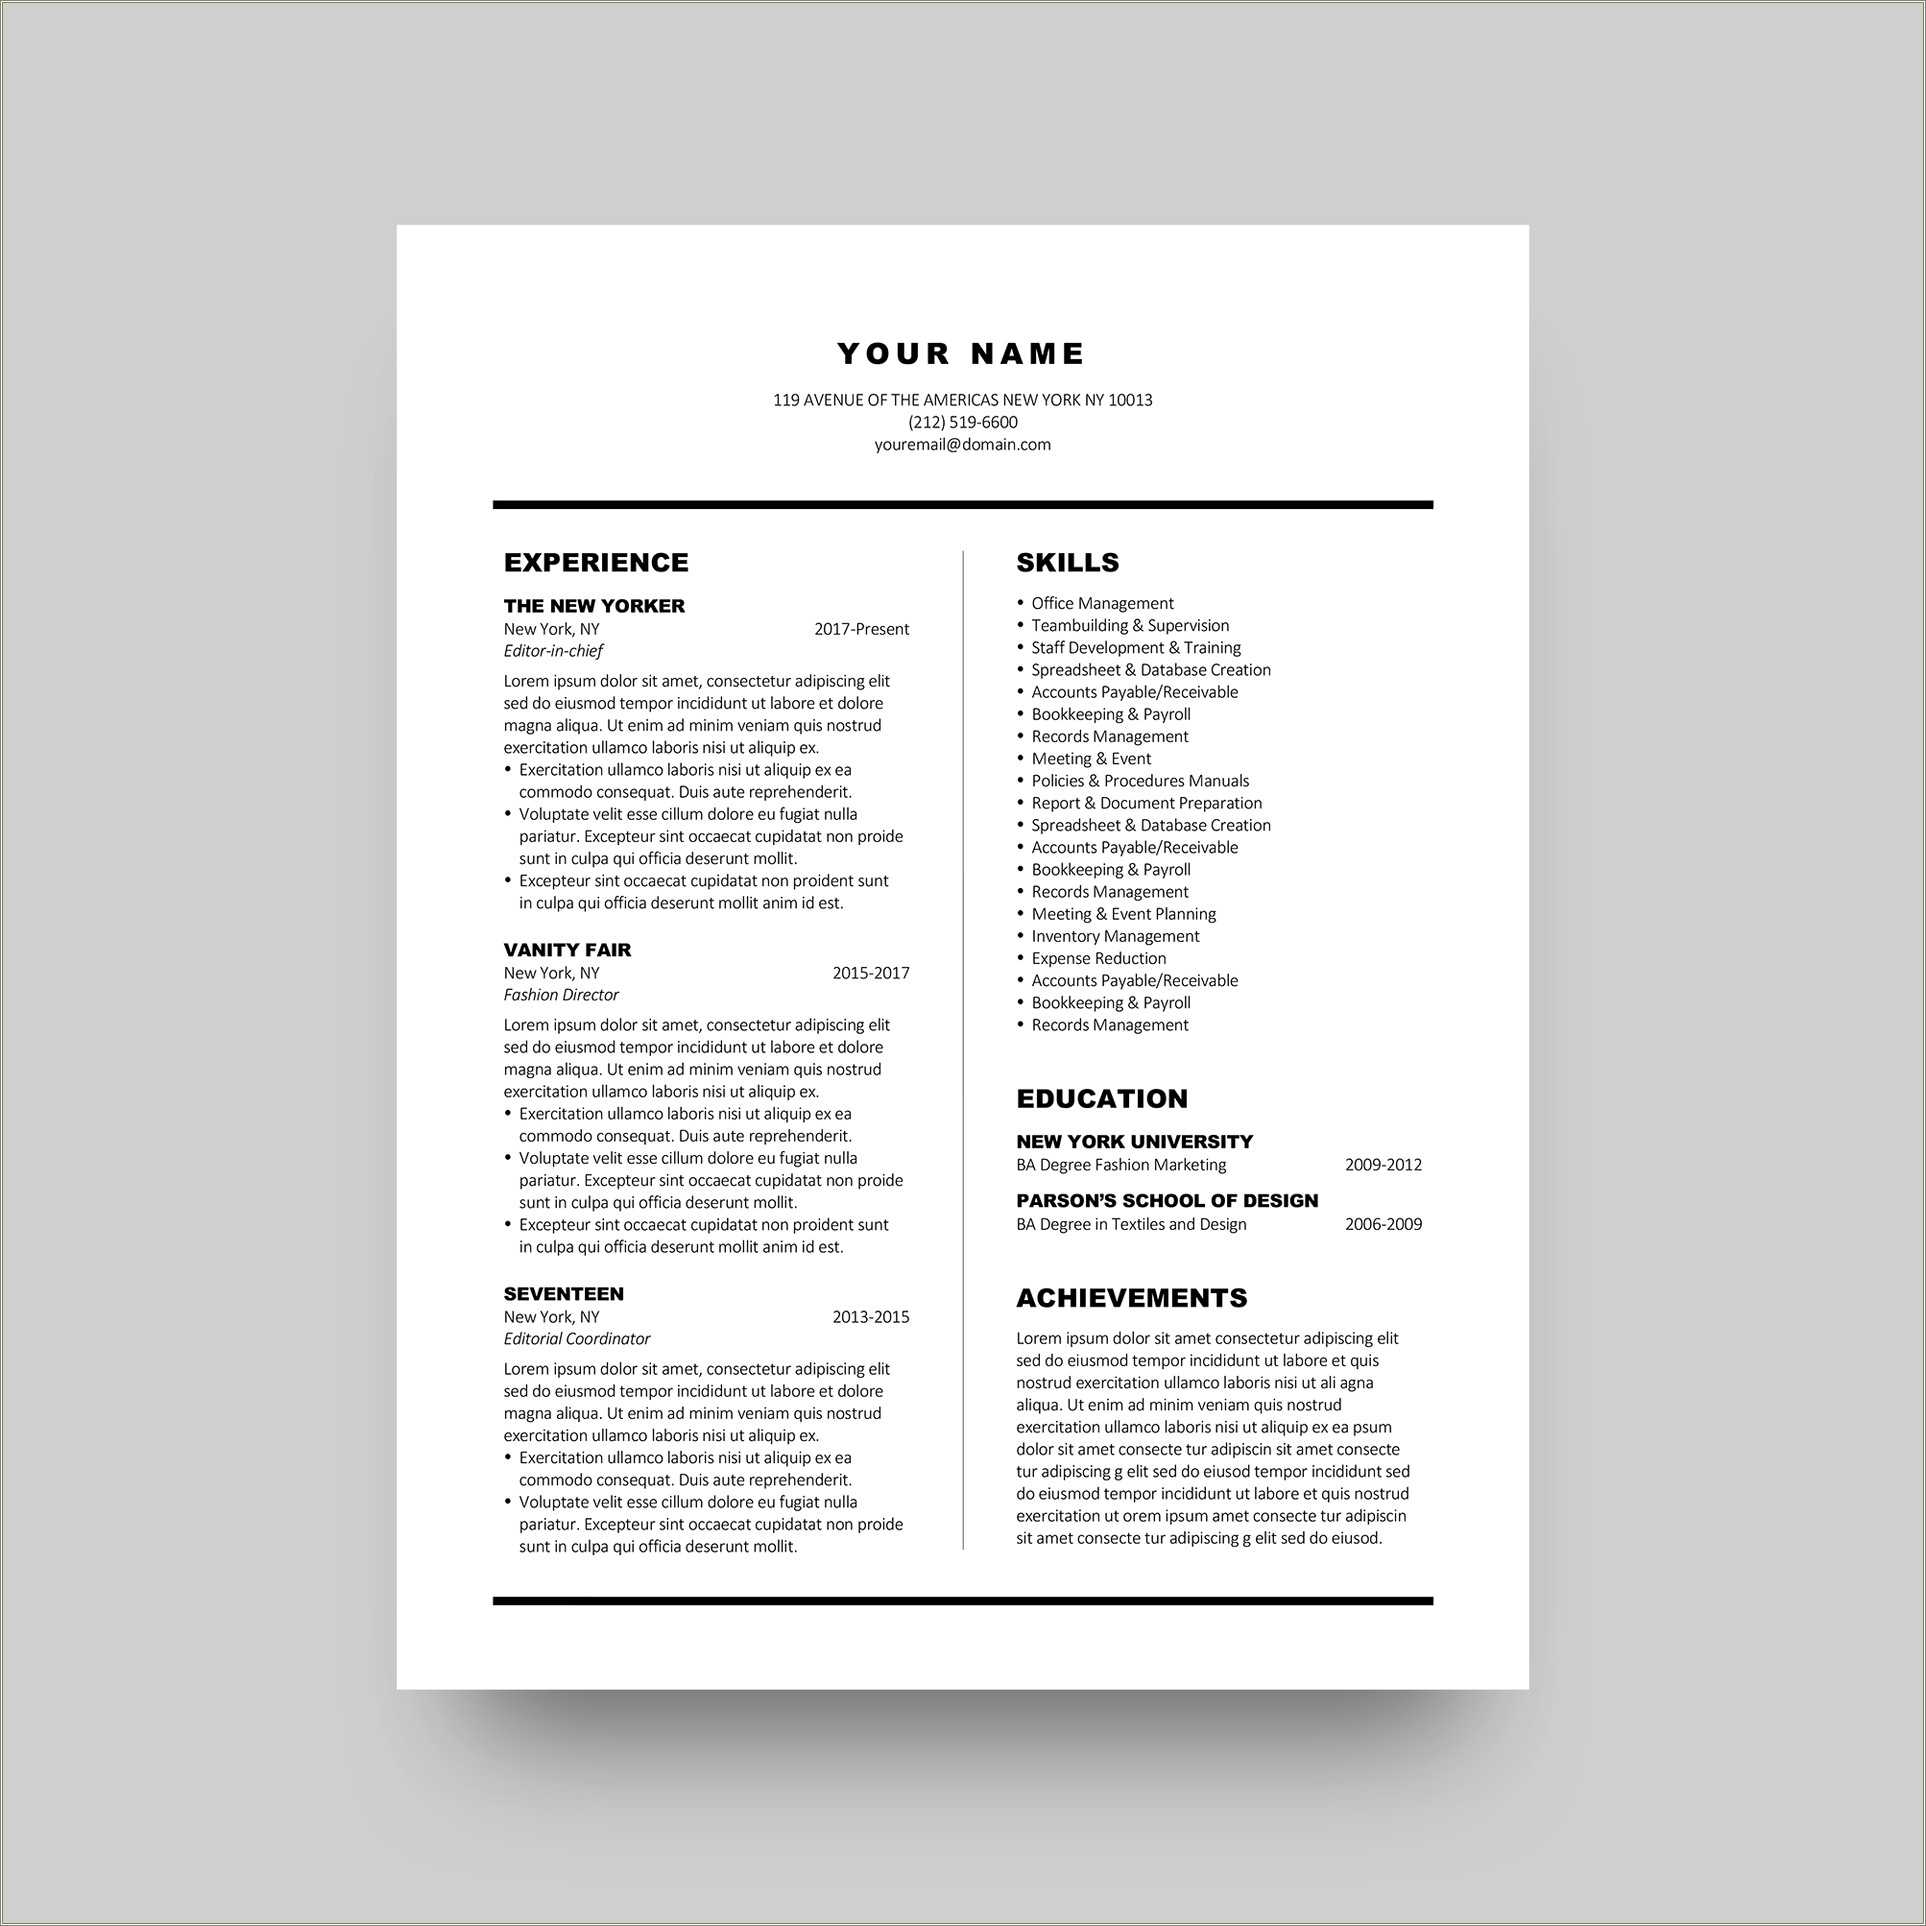 big picture thinking resume